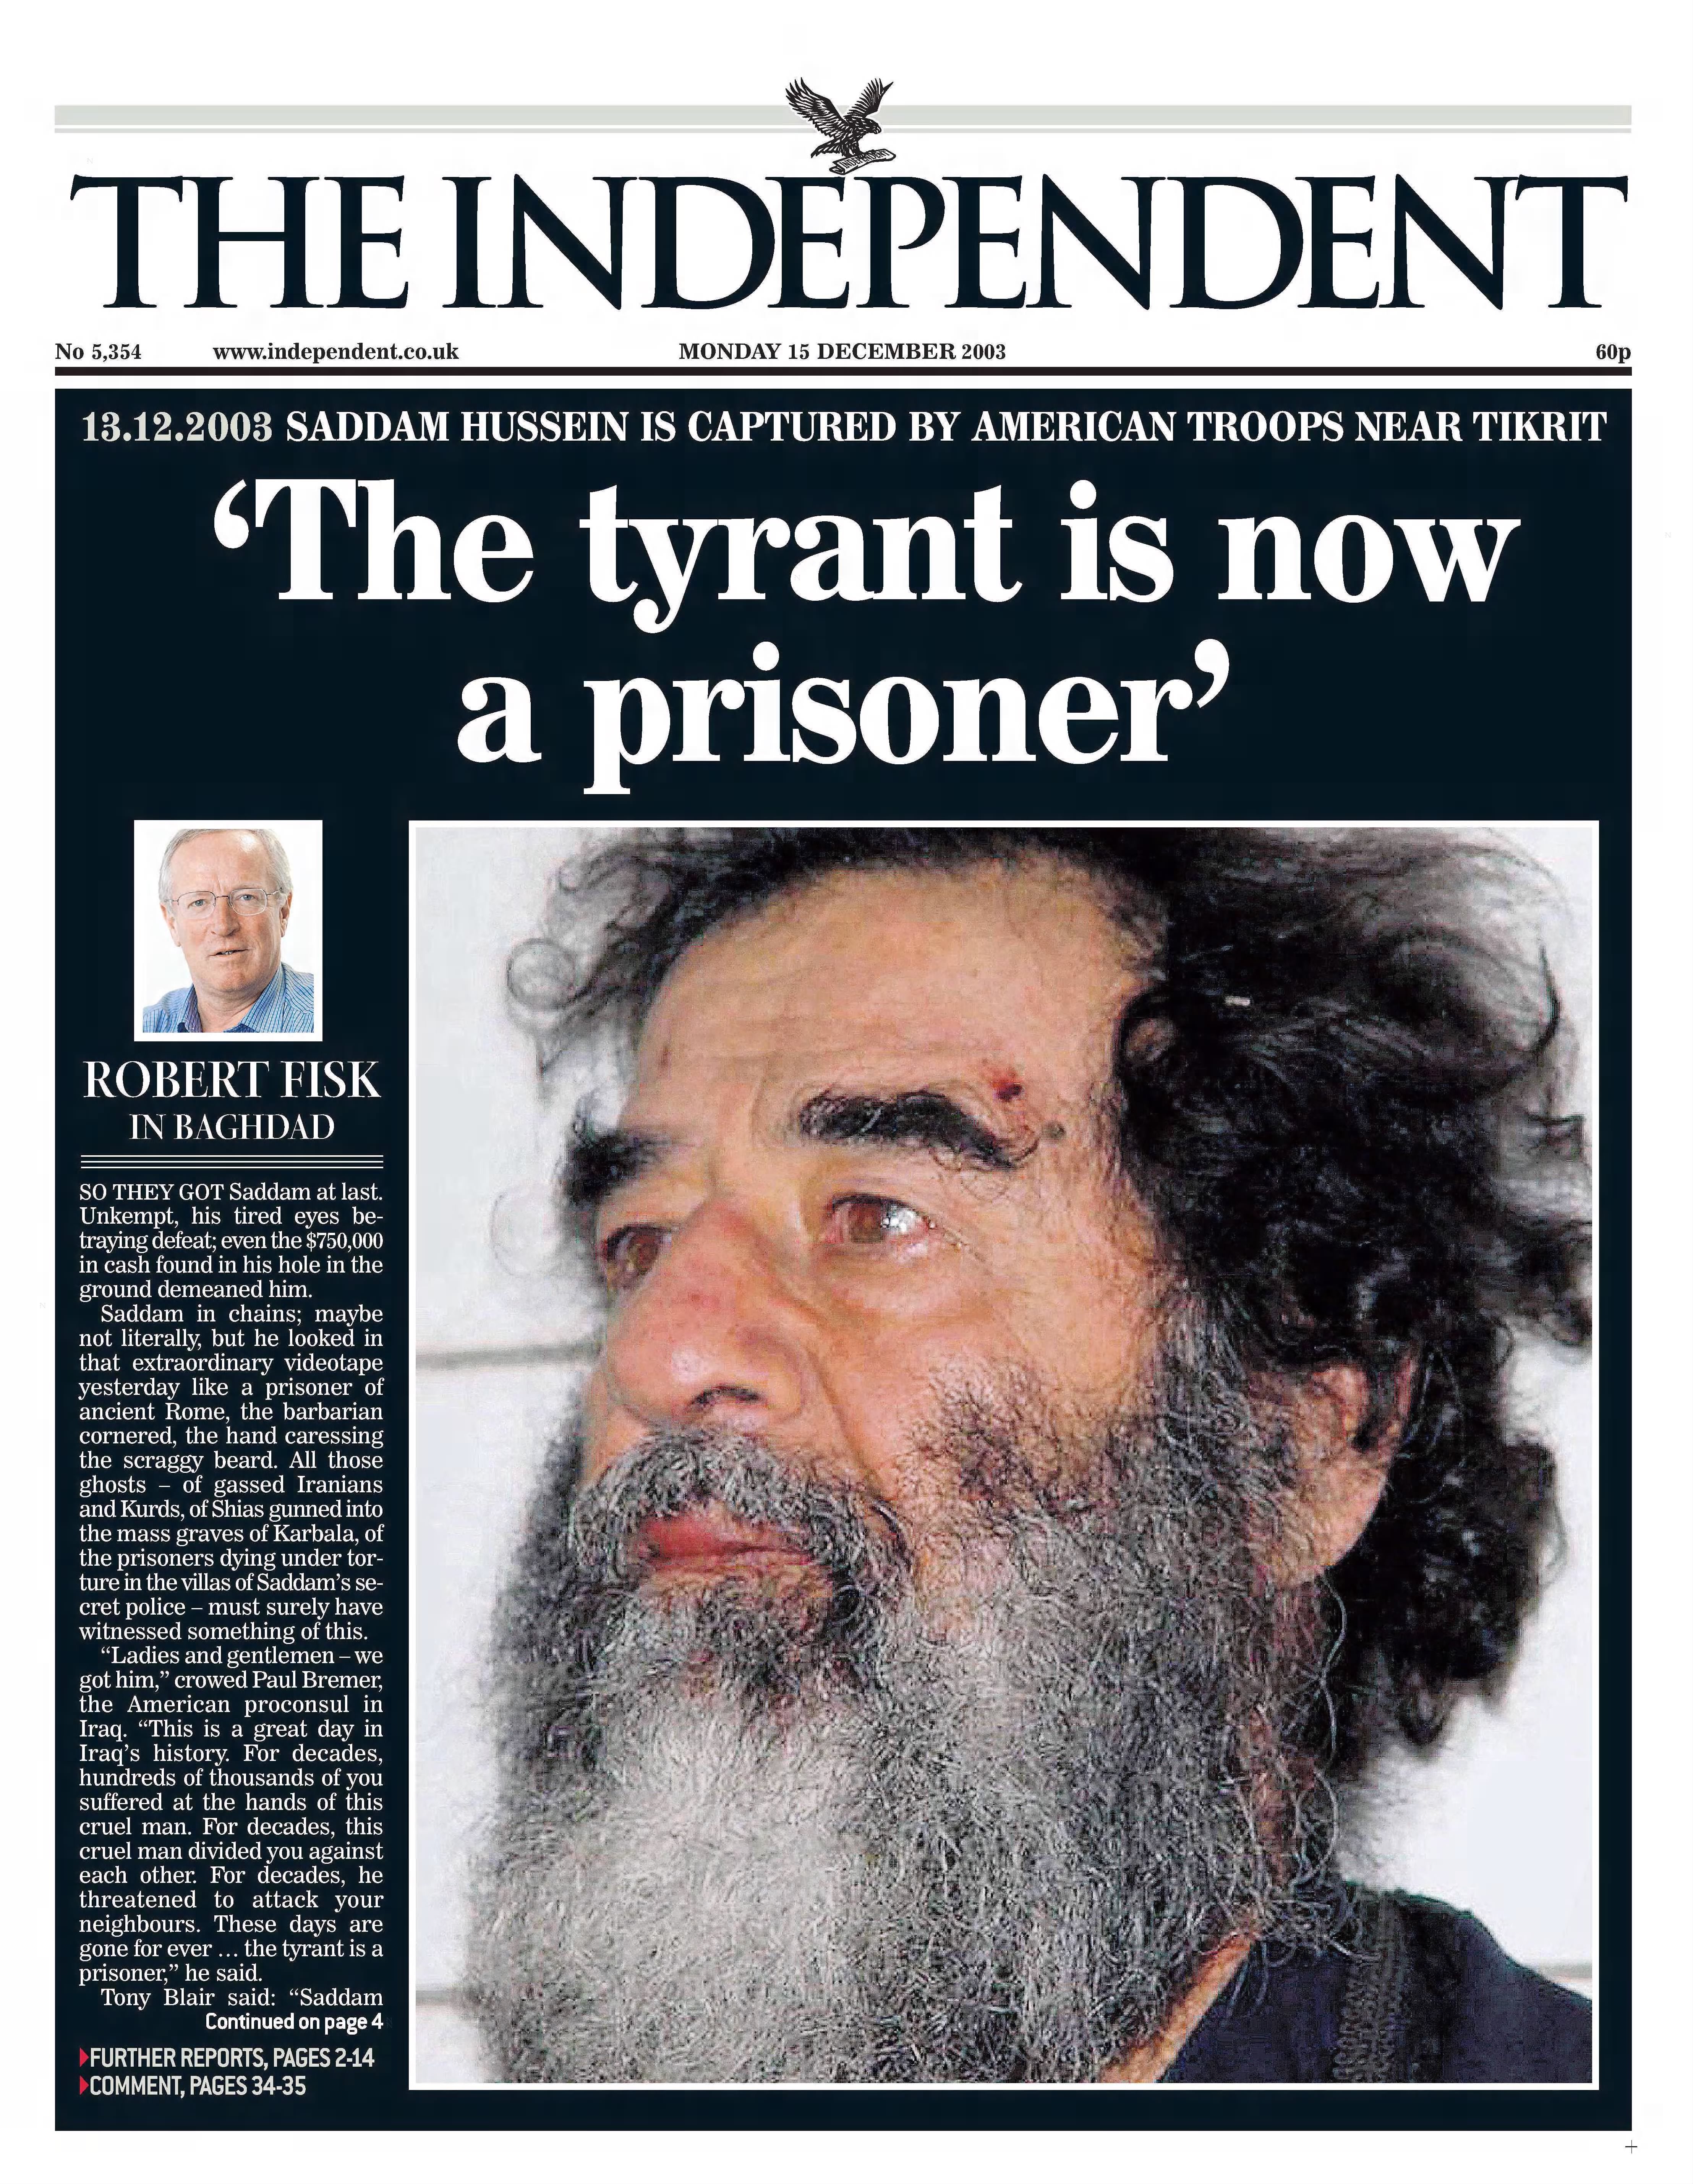 The Independent front page on 15 December 2003